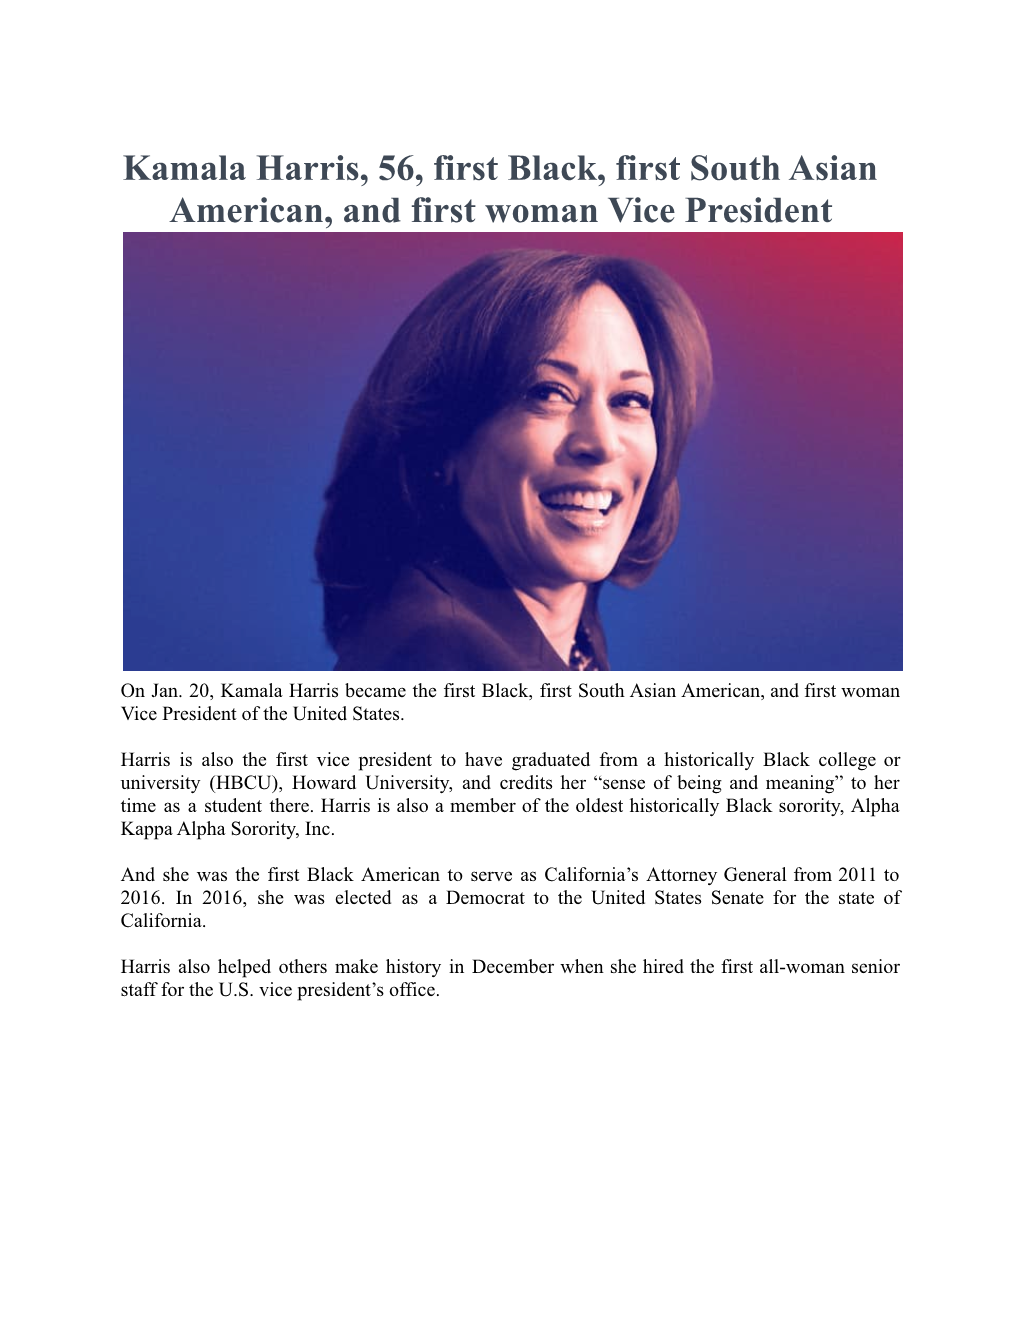 Kamala Harris, 56, First Black, First South Asian American, and First Woman Vice President